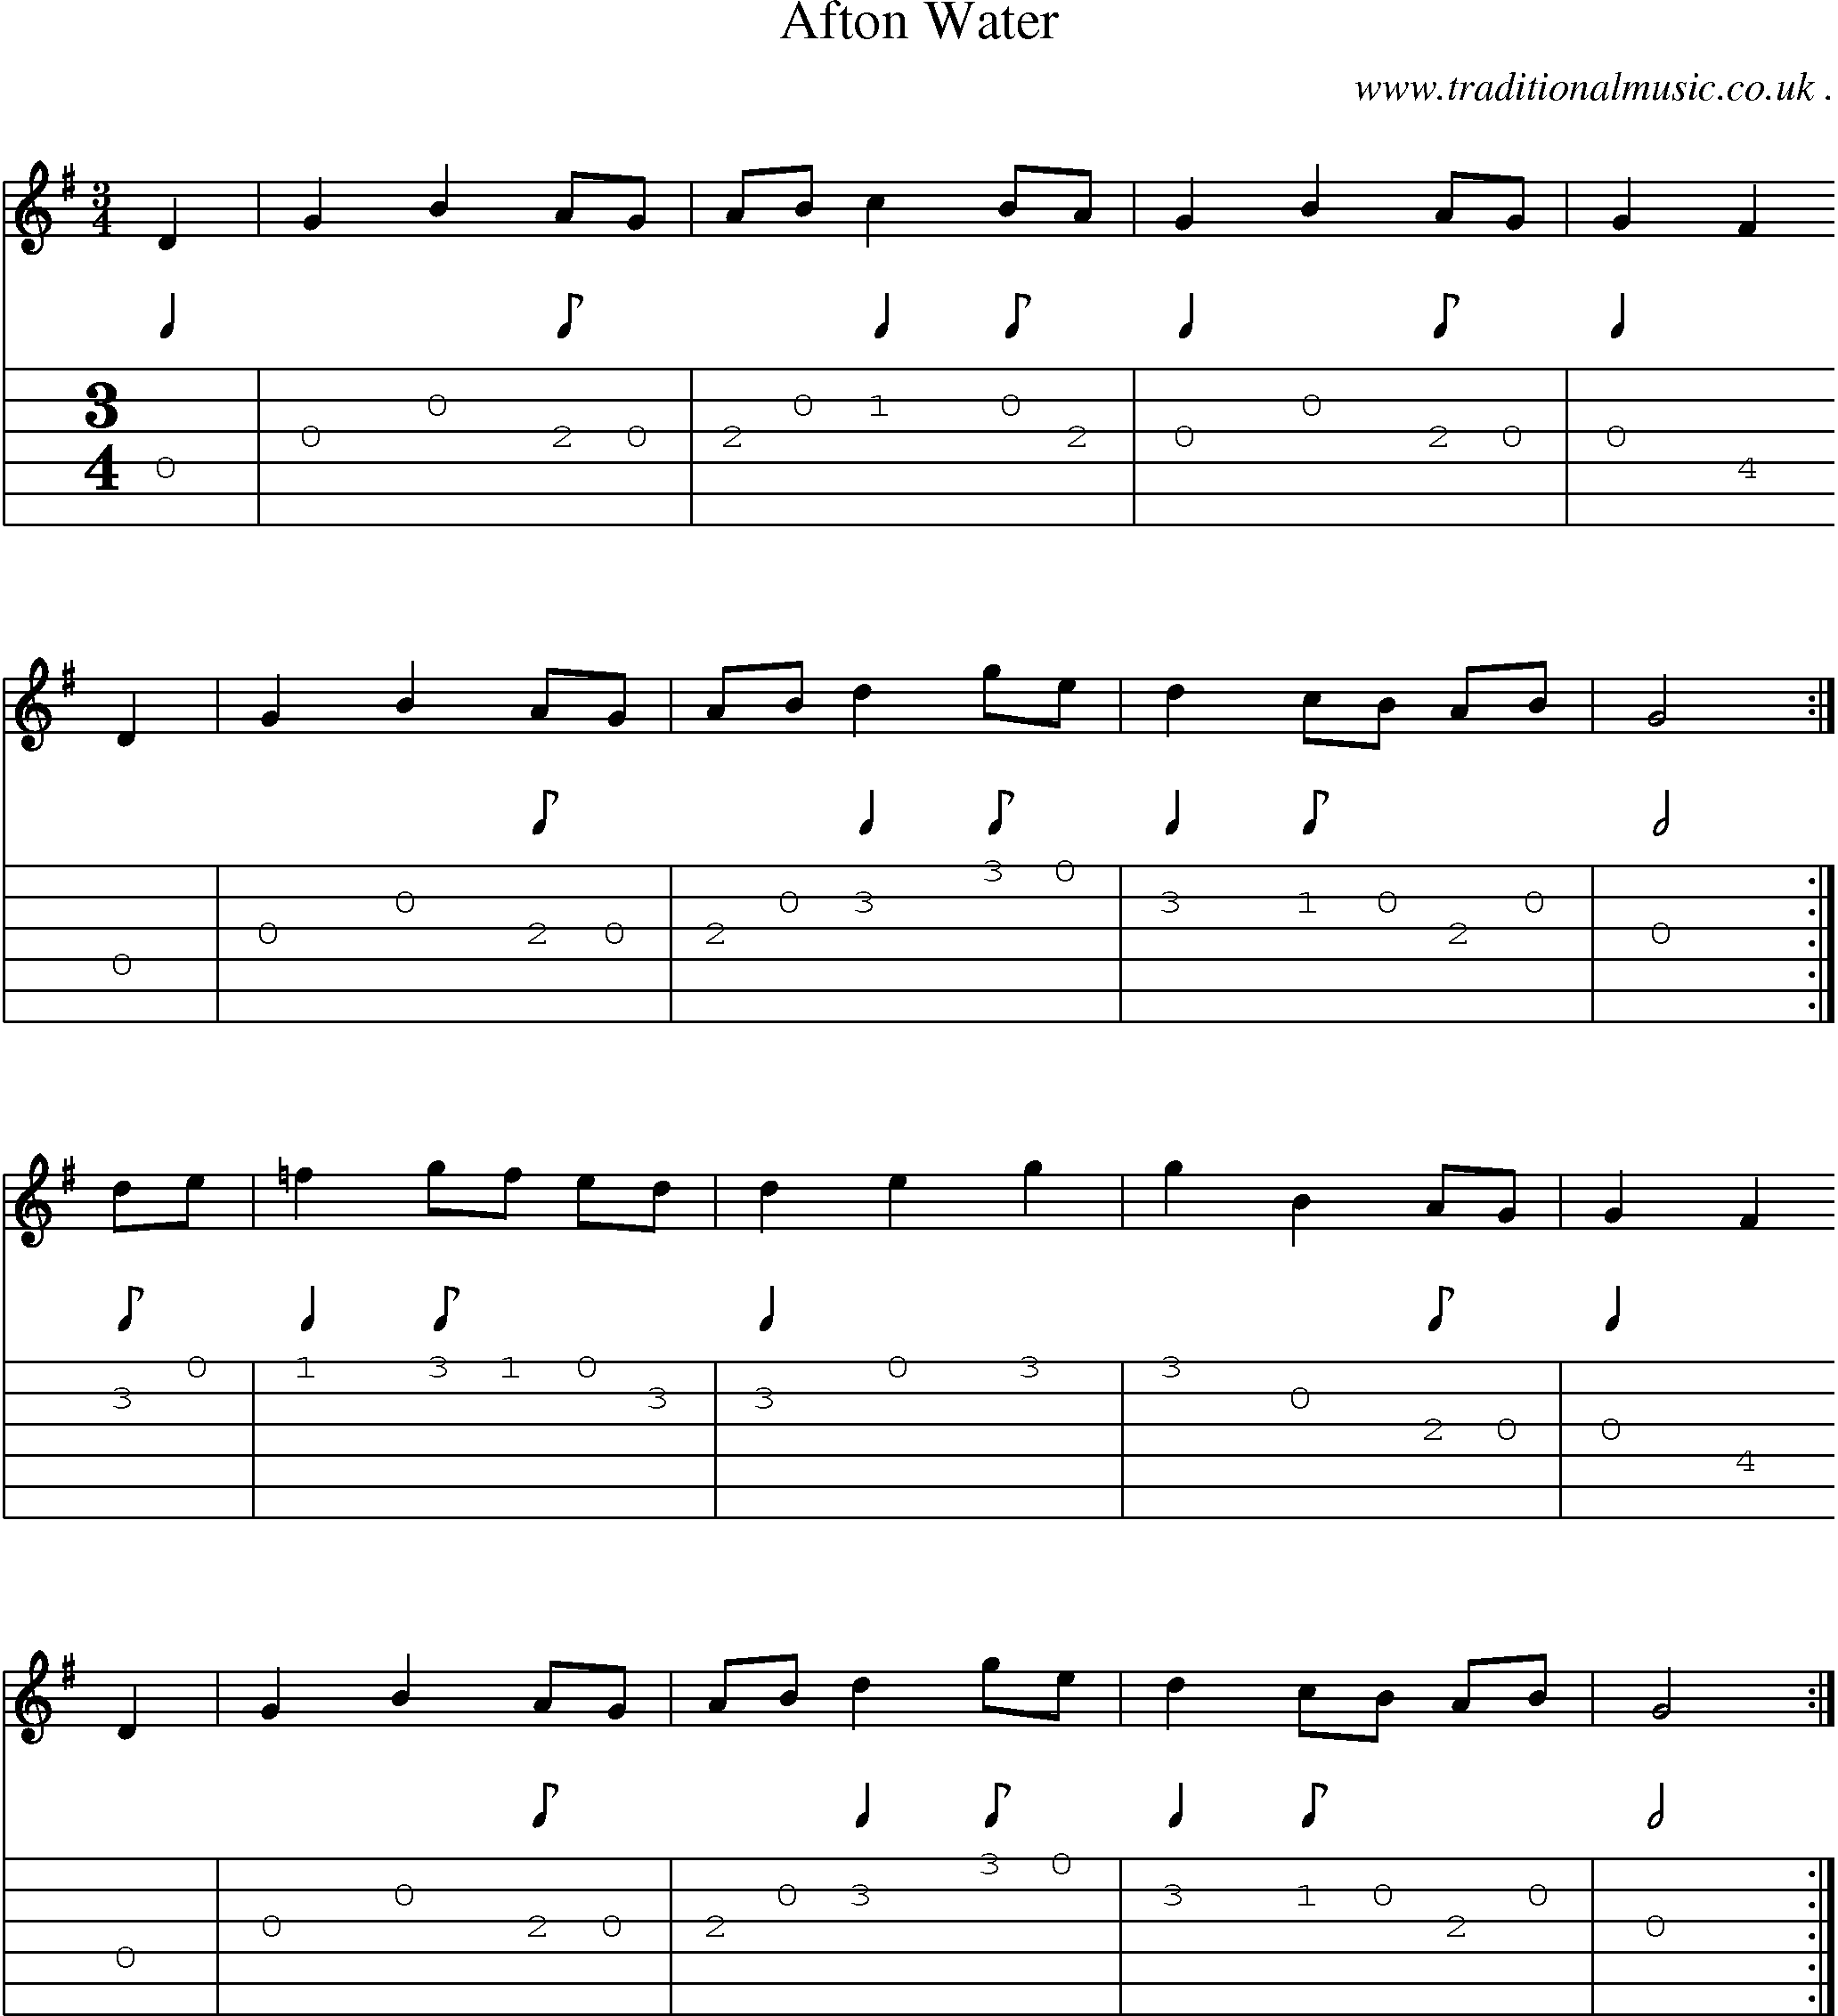 Sheet-music  score, Chords and Guitar Tabs for Afton Water